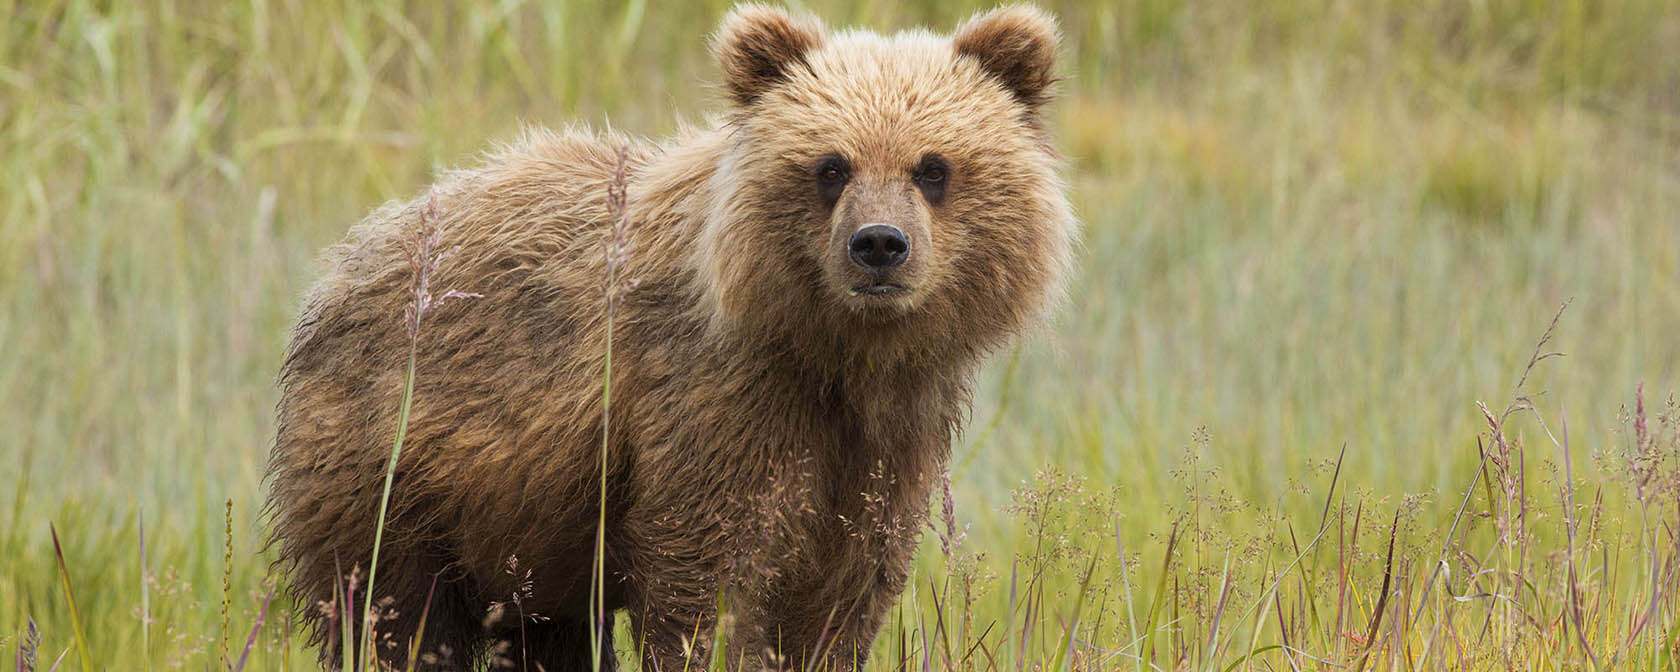 Some progress for protecting animals on Alaska’s national preserves—but not nearly enough